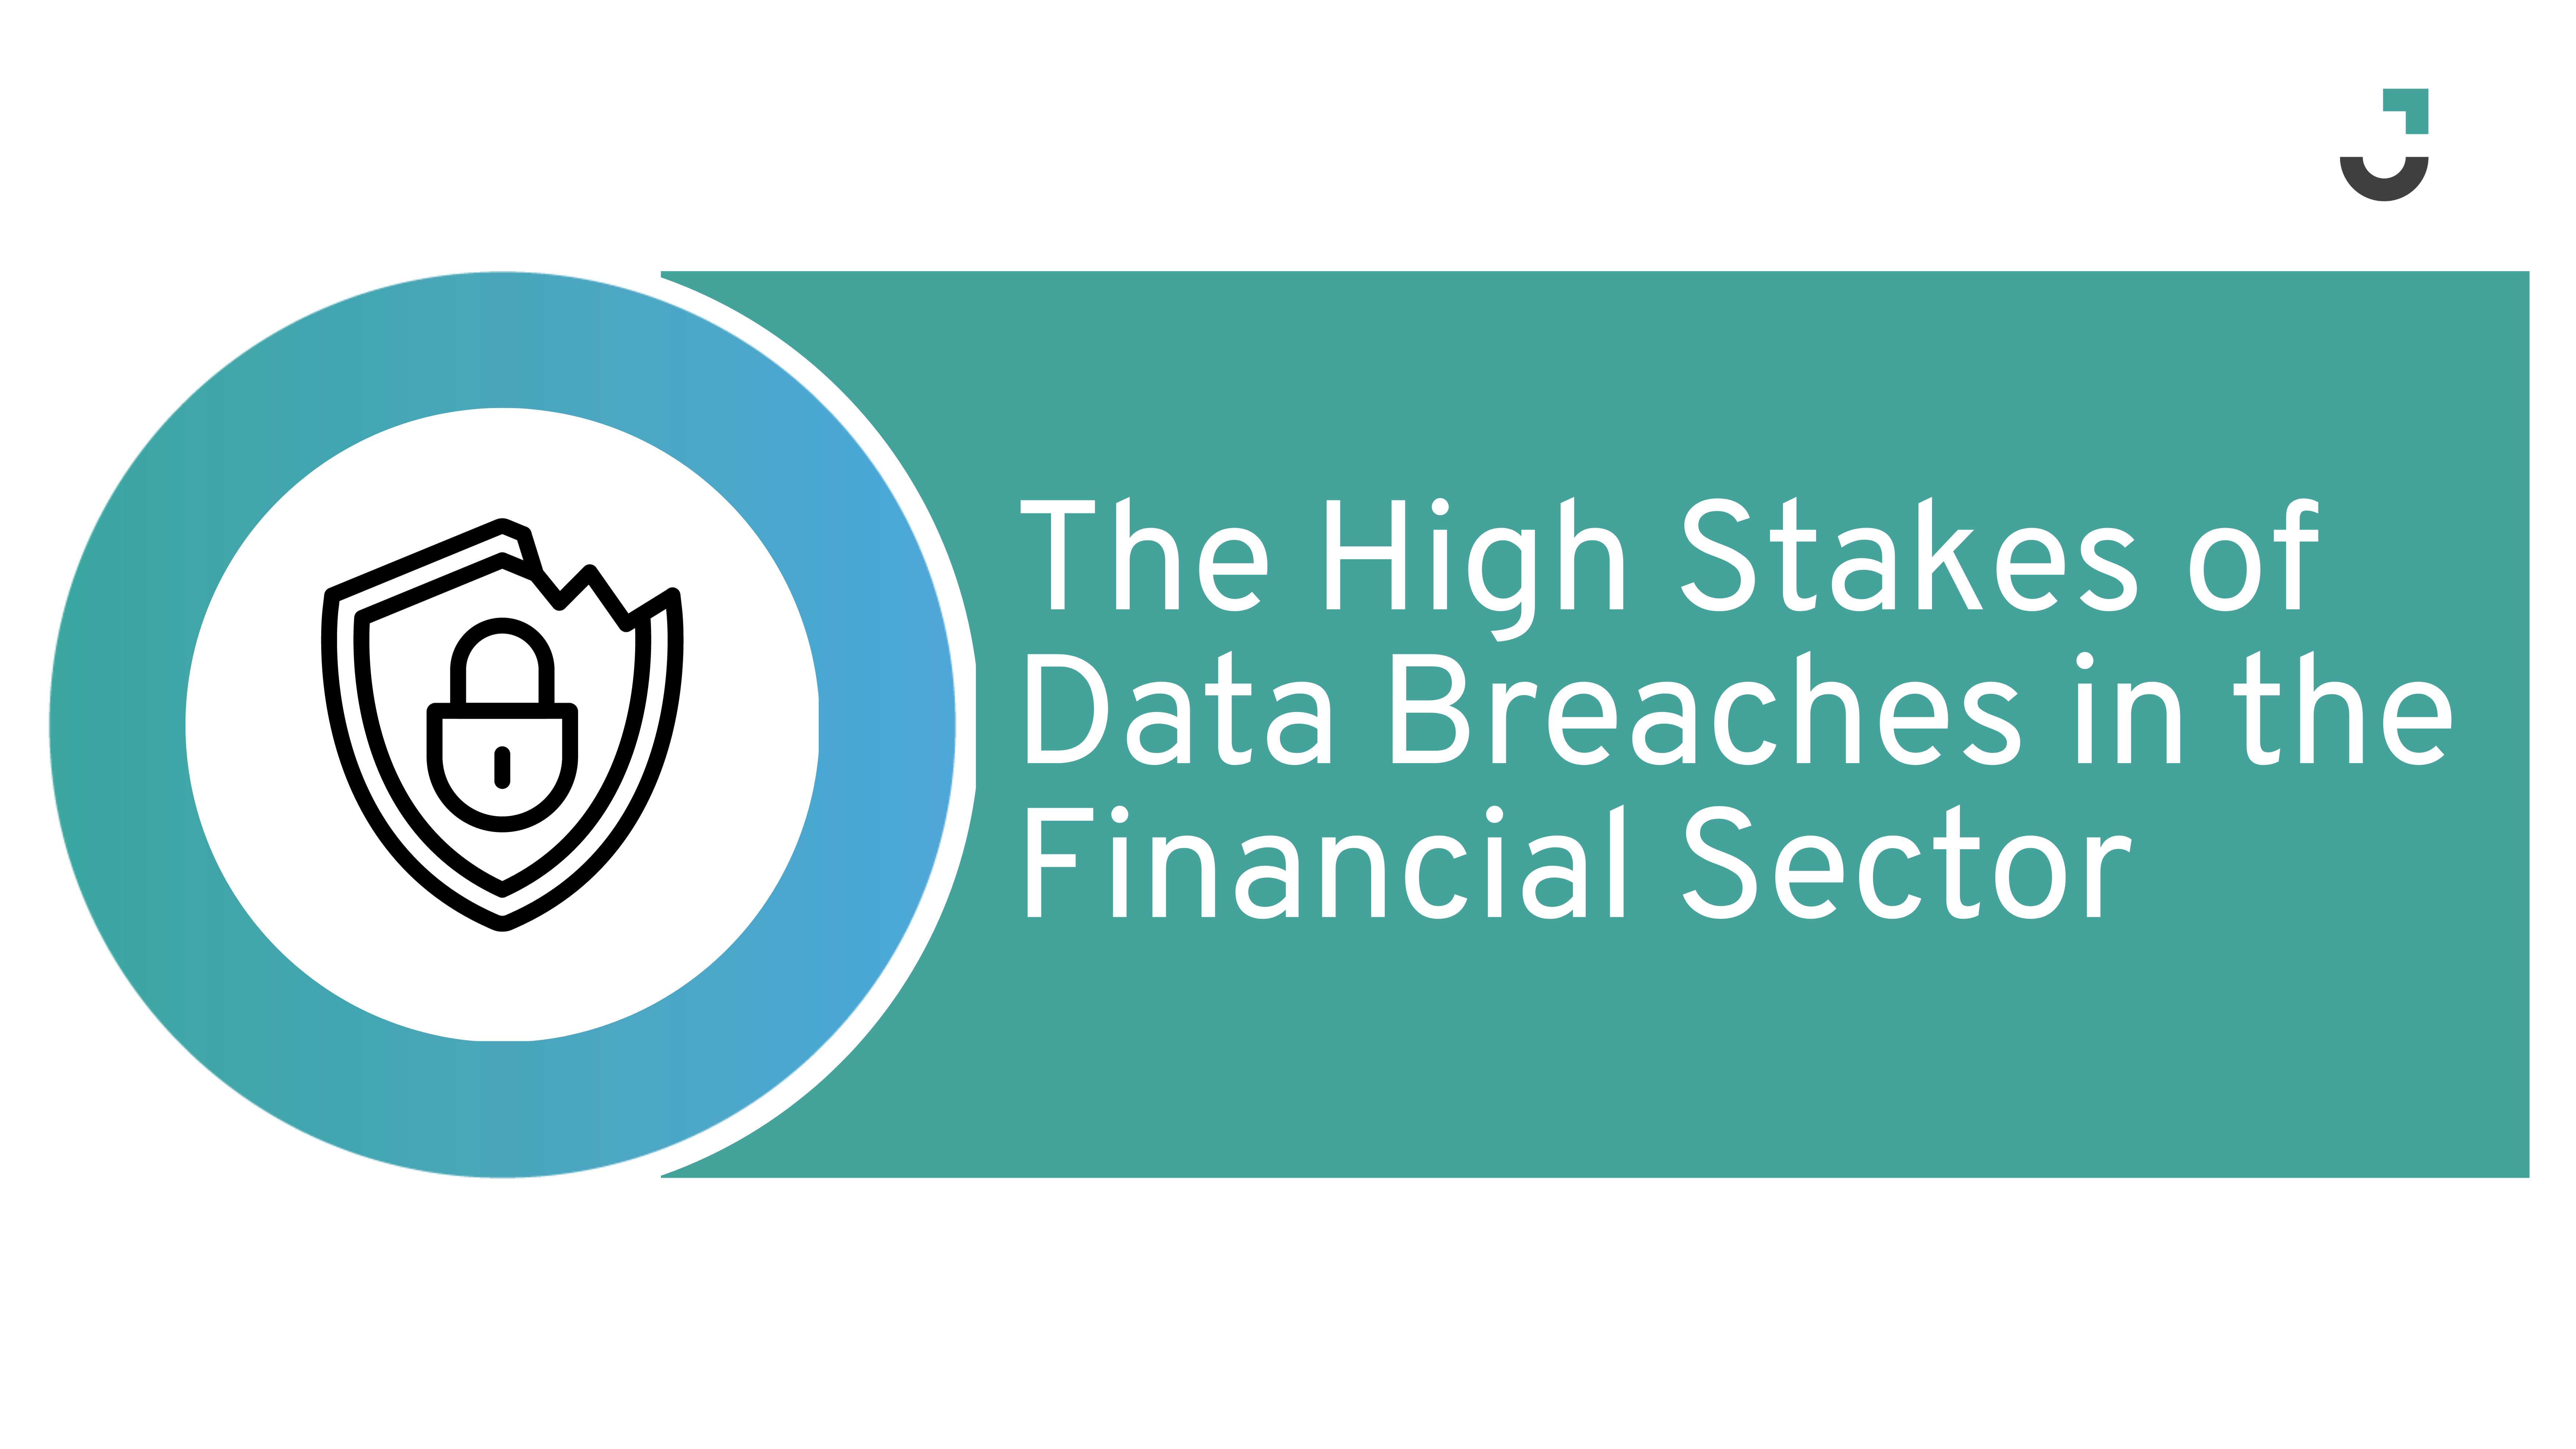 The High Stakes of Data Breaches in the Financial Sector